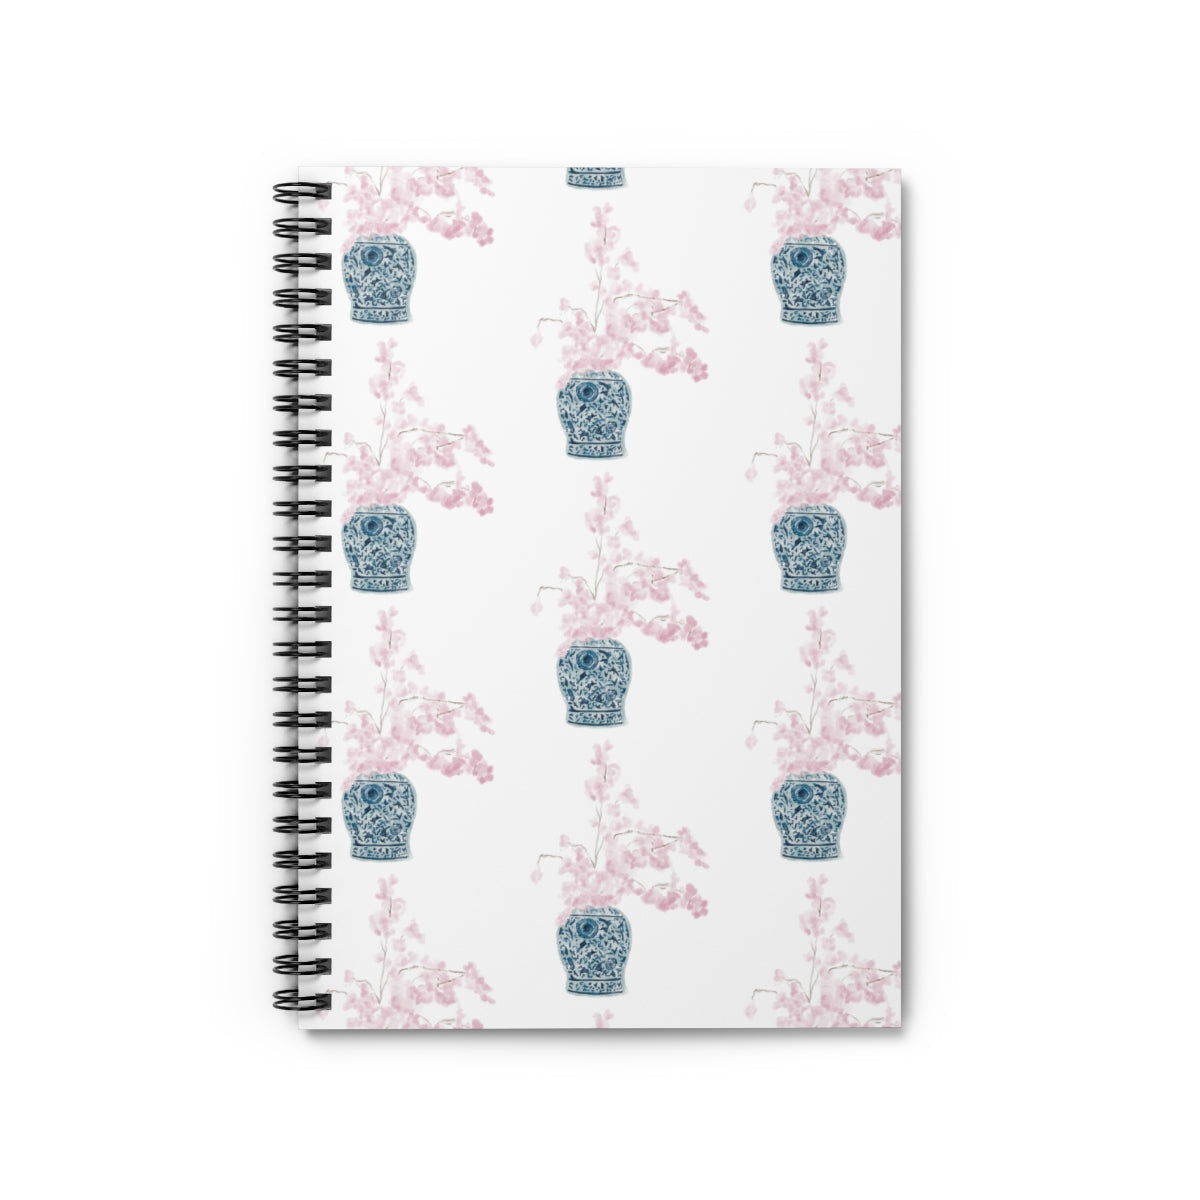 VASE WITH PINK FLOWERS NOTEBOOK - BRYKNOLO LLC Paper products One Size